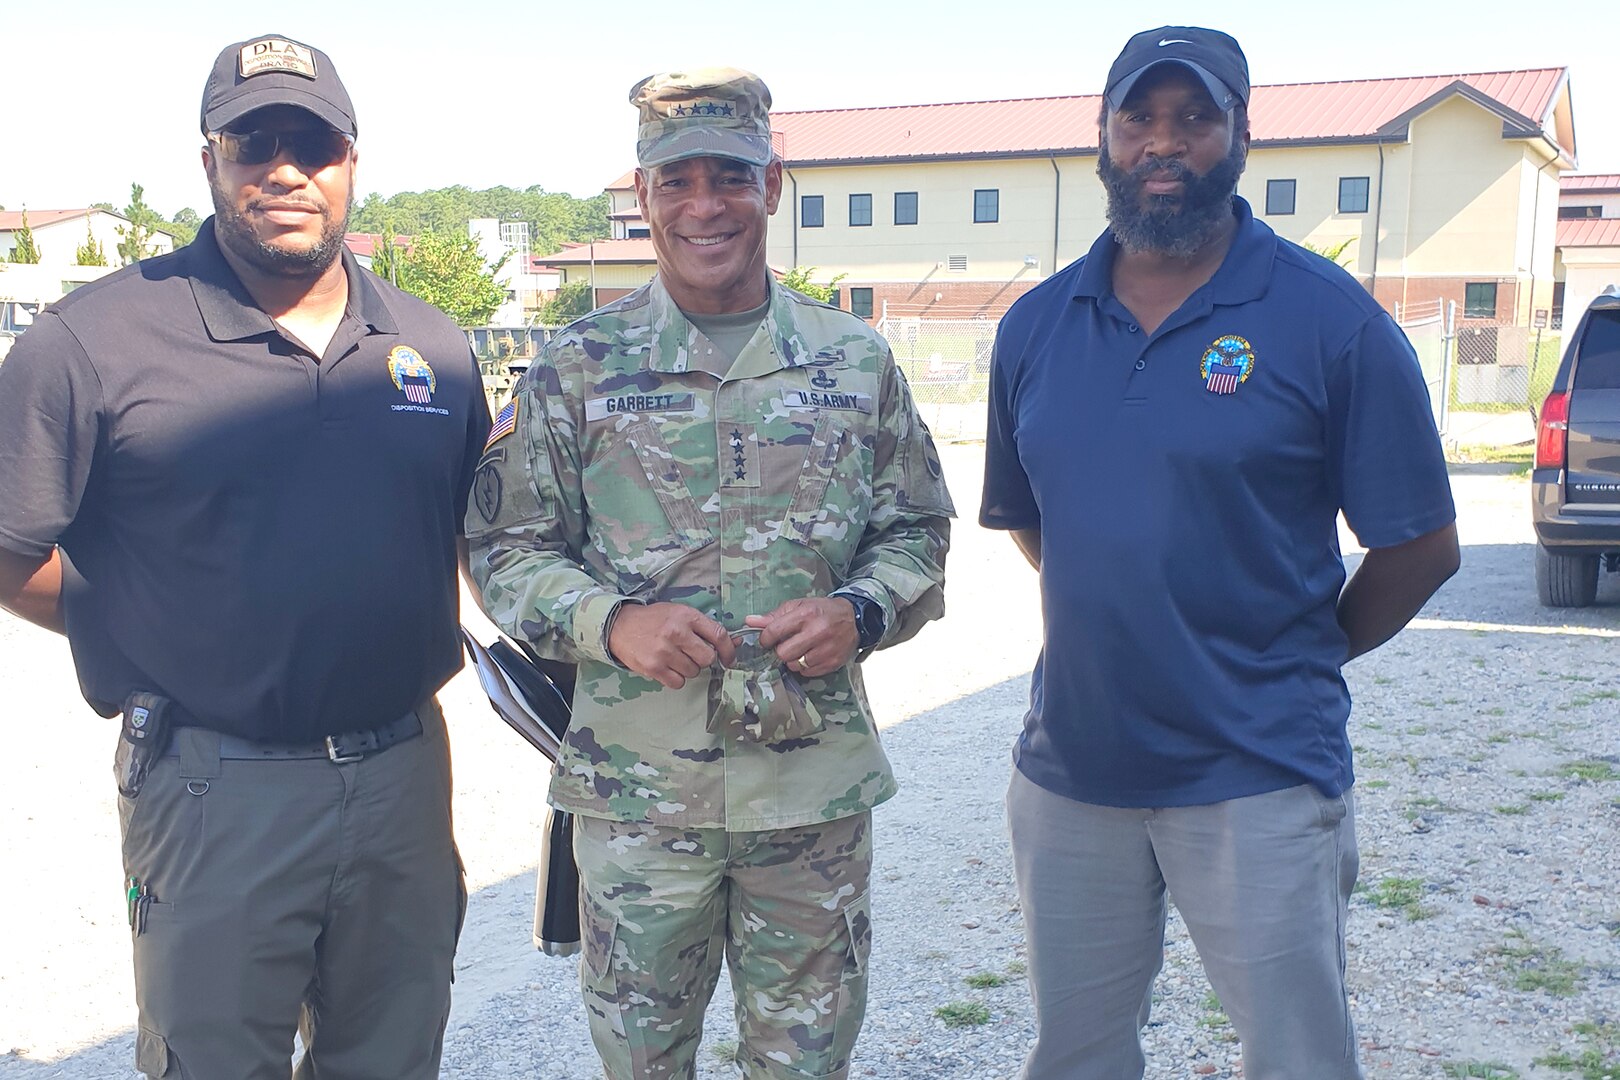 Two civilian men in blue polos stand next to a military man for a photo op